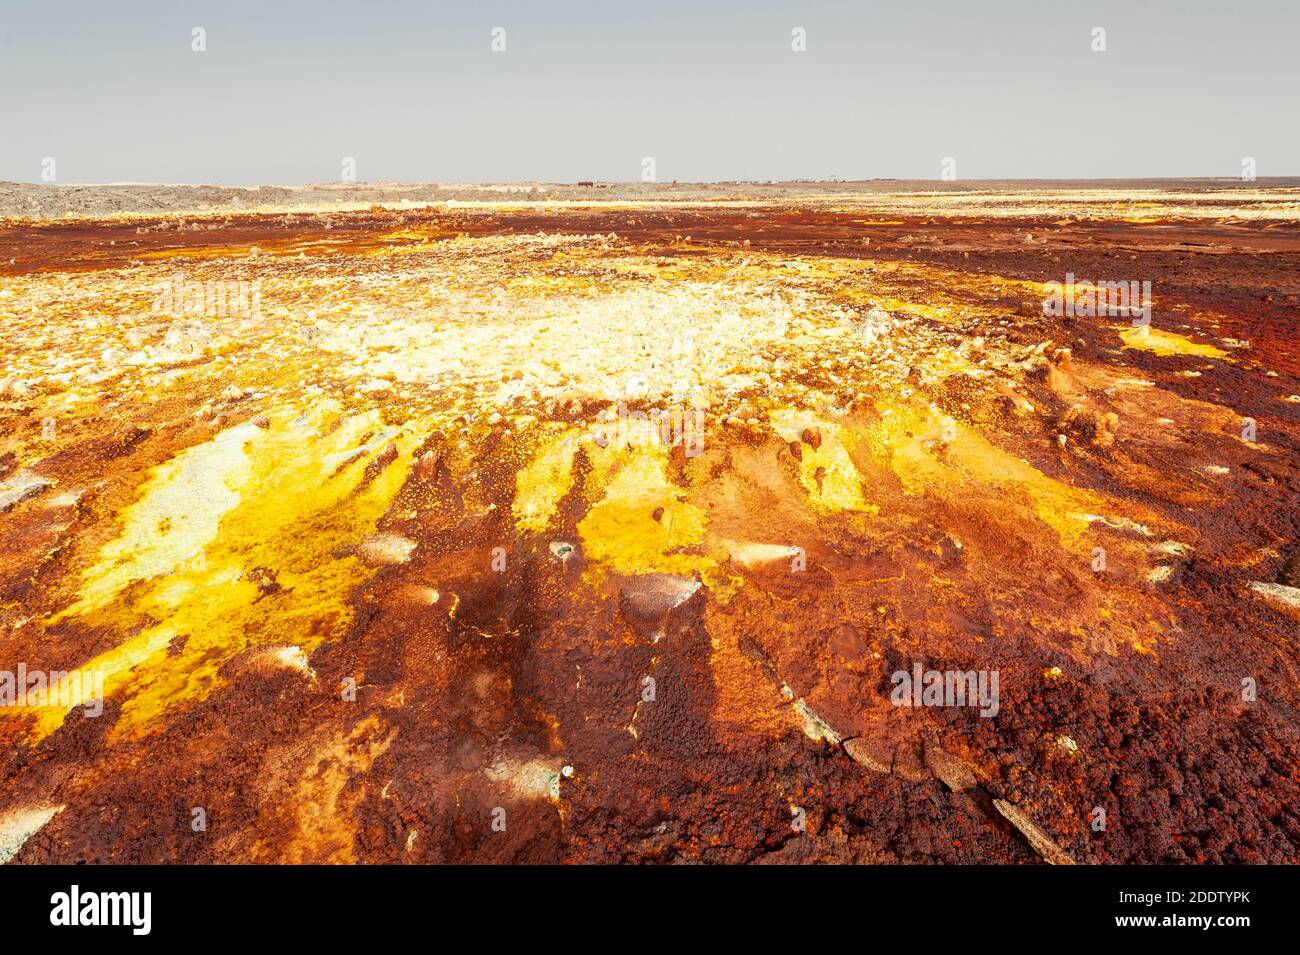 Dallol sulphur or sulfur springs and pools and rock formations in the Danakil Depression in Afar, Ethiopia Stock Photo